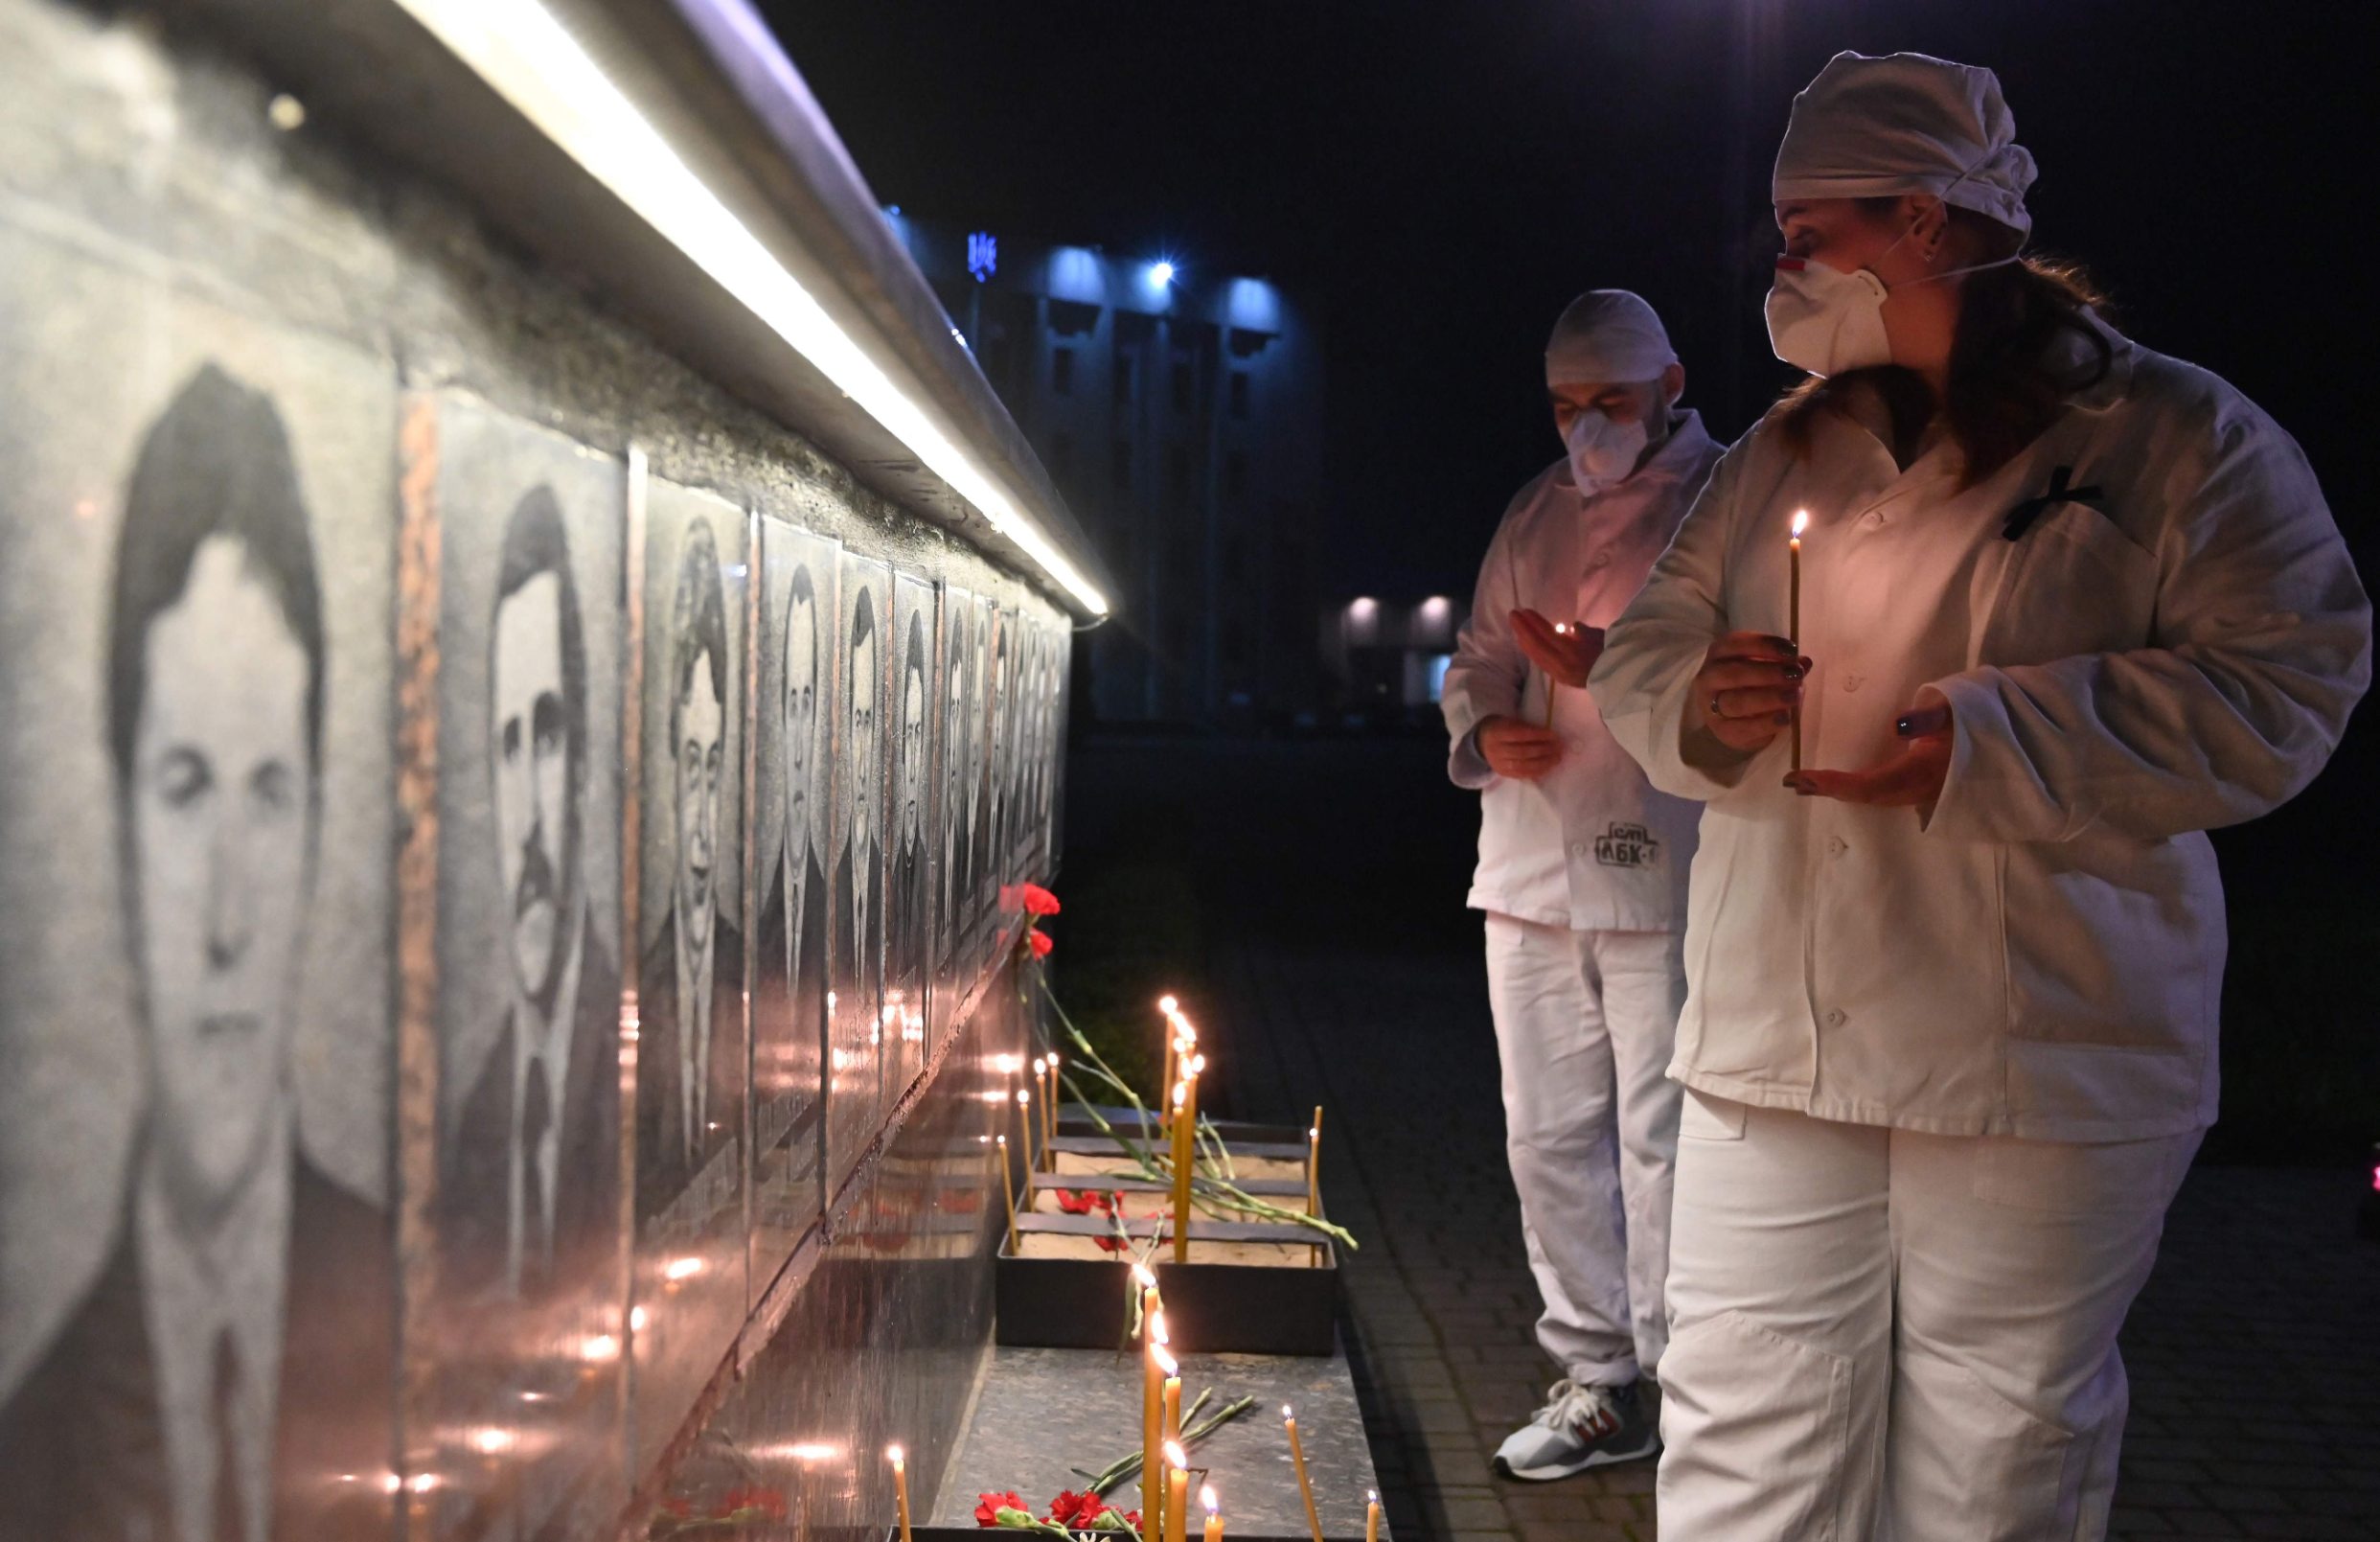 TOPSHOT - Chernobyl plant workers wearing face masks light candles at the monument to Chernobyl victims in Slavutich, the city where the power station's personnel lived, some 50 kilometres (30 miles) from the accident site on April 25, 2020 during a memorial ceremony amid the COVID-19 pandemic, caused by the novel coronavirus. - Ukraine on April 26, 2017 marks the 34th anniversary of the Chernobyl disaster which was the world's worst nuclear accident. (Photo by Sergei SUPINSKY / AFP)